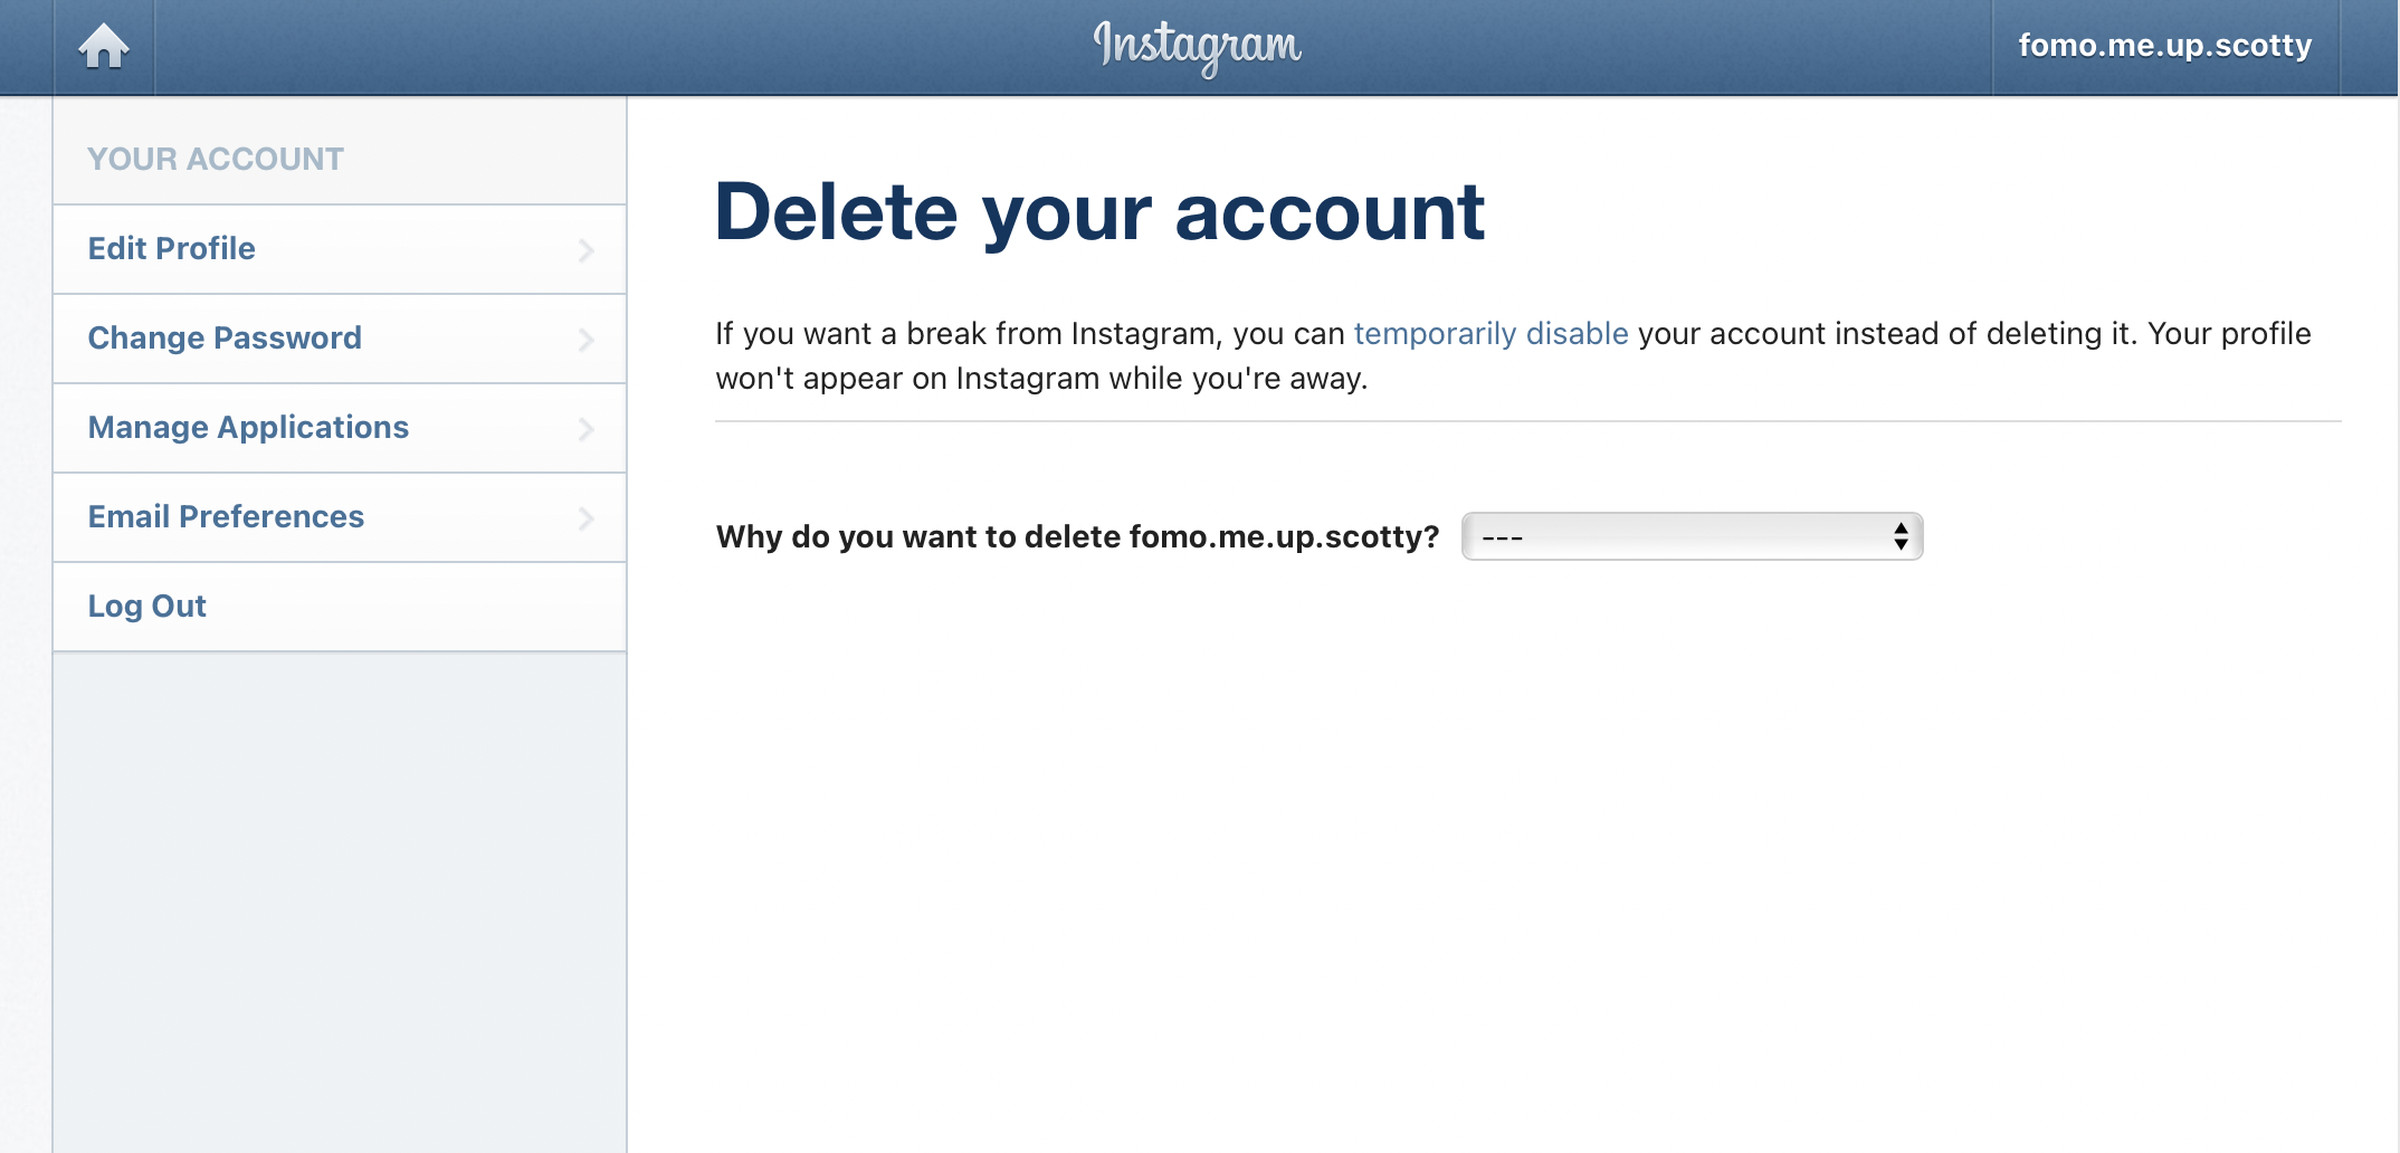 Instagram will clearly show you what account you’re about to delete, and ask you why.